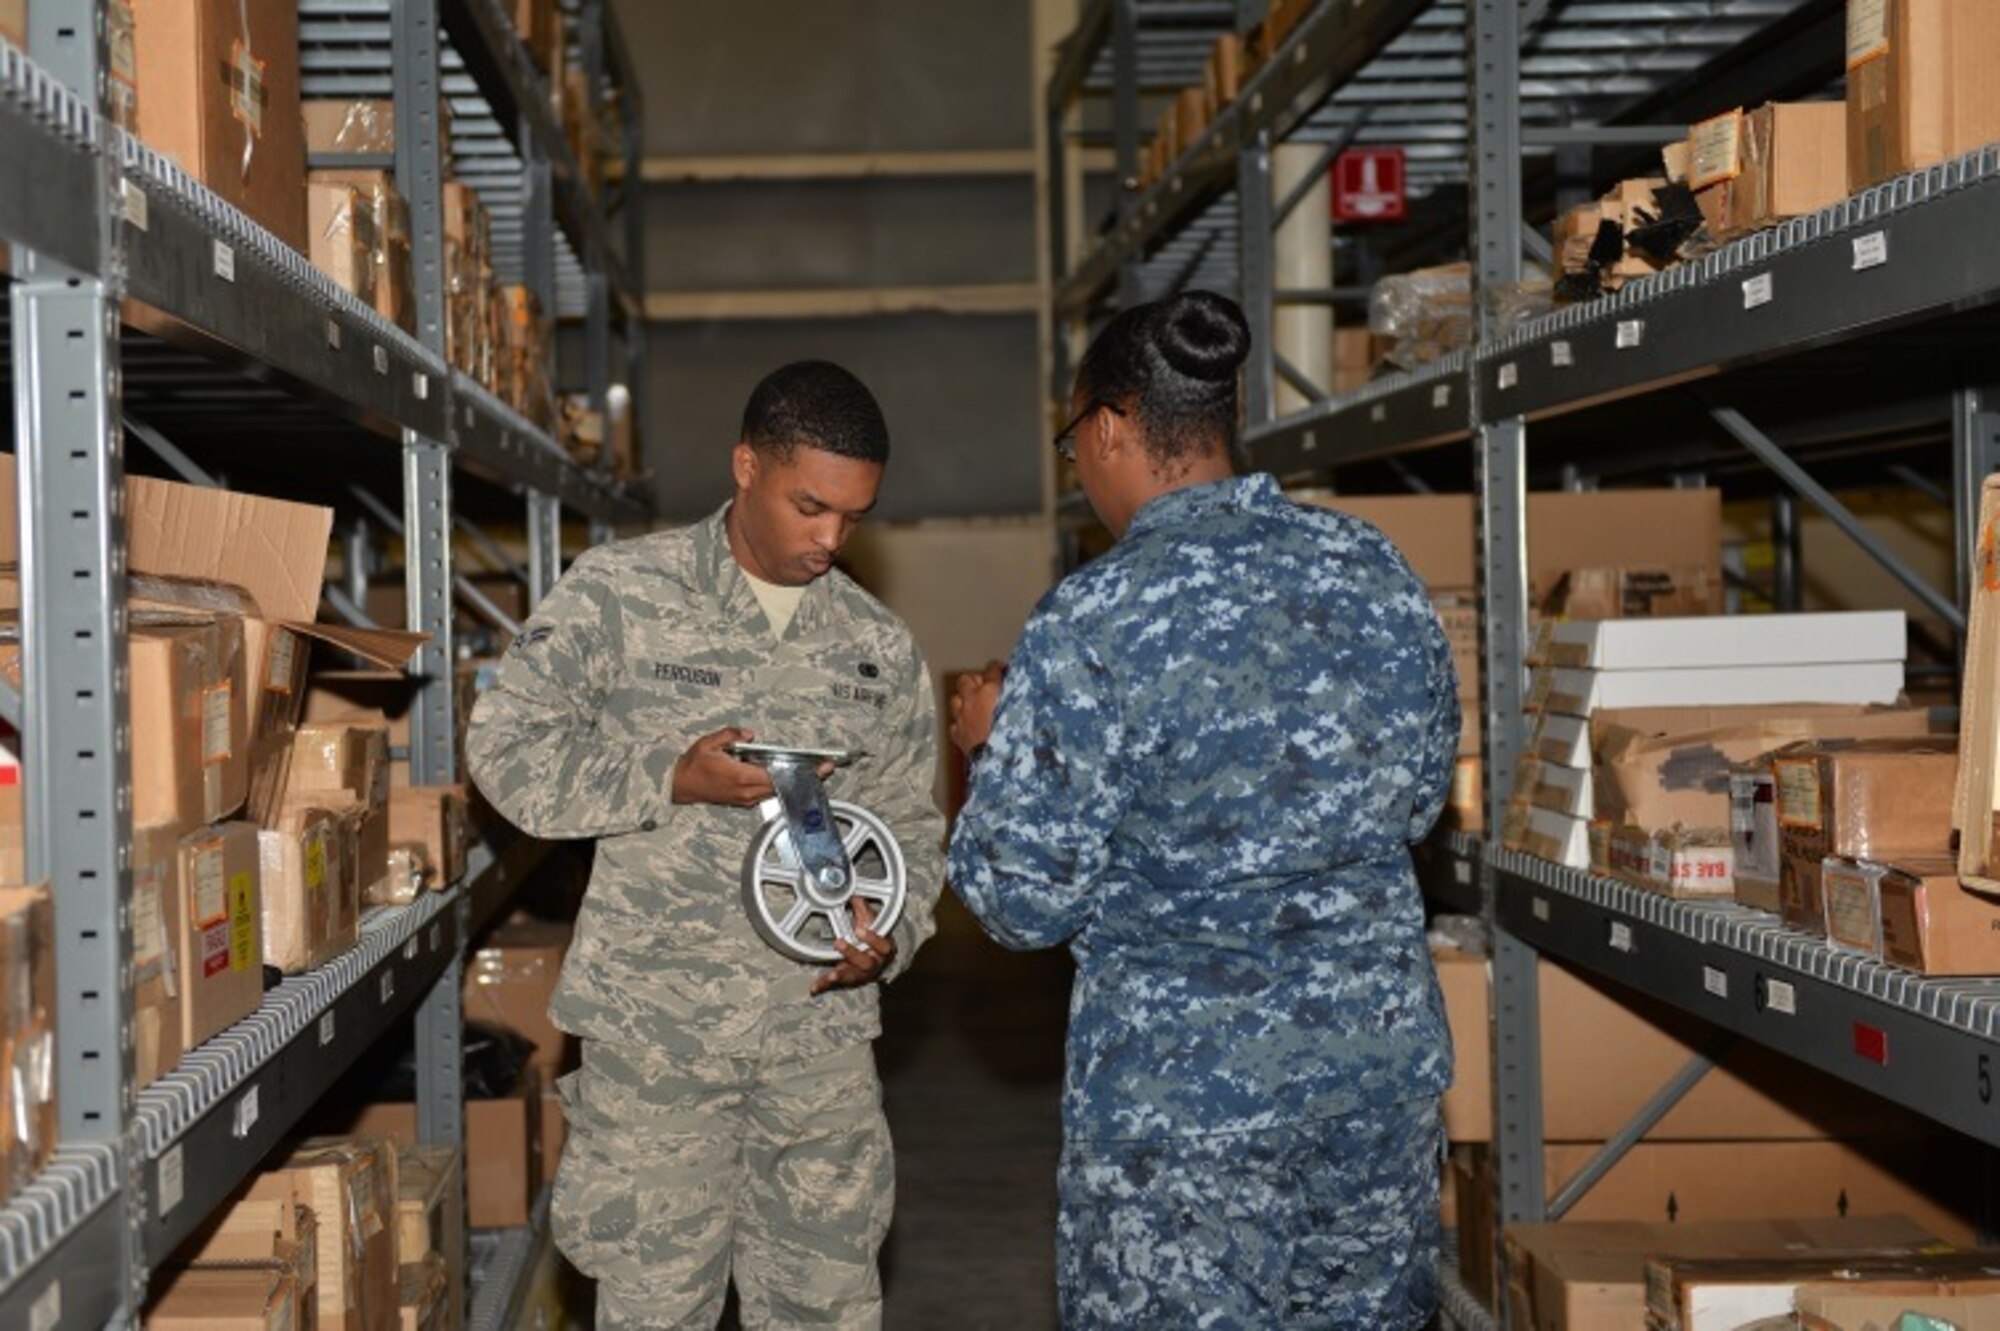 Airman 1st Class Kristoffer Ferguson, 96th Logistics Readiness Squadron F-35 supply apprentice, and Petty Officer 2nd Class Whitney Moss, 33rd Maintenance Squadron logistics specialist, verify equipment barcodes at Eglin Air Force Base, Fla., Oct. 15, 2015. The 96th LRS supplies the F-35 Lightning II A and C parts and equipment to the 33rd Fighter Wing and Navy Strike Fighter Squadron 101 Grim Reapers. (U.S. Air Force Photo/Senior Airman Andrea Posey)